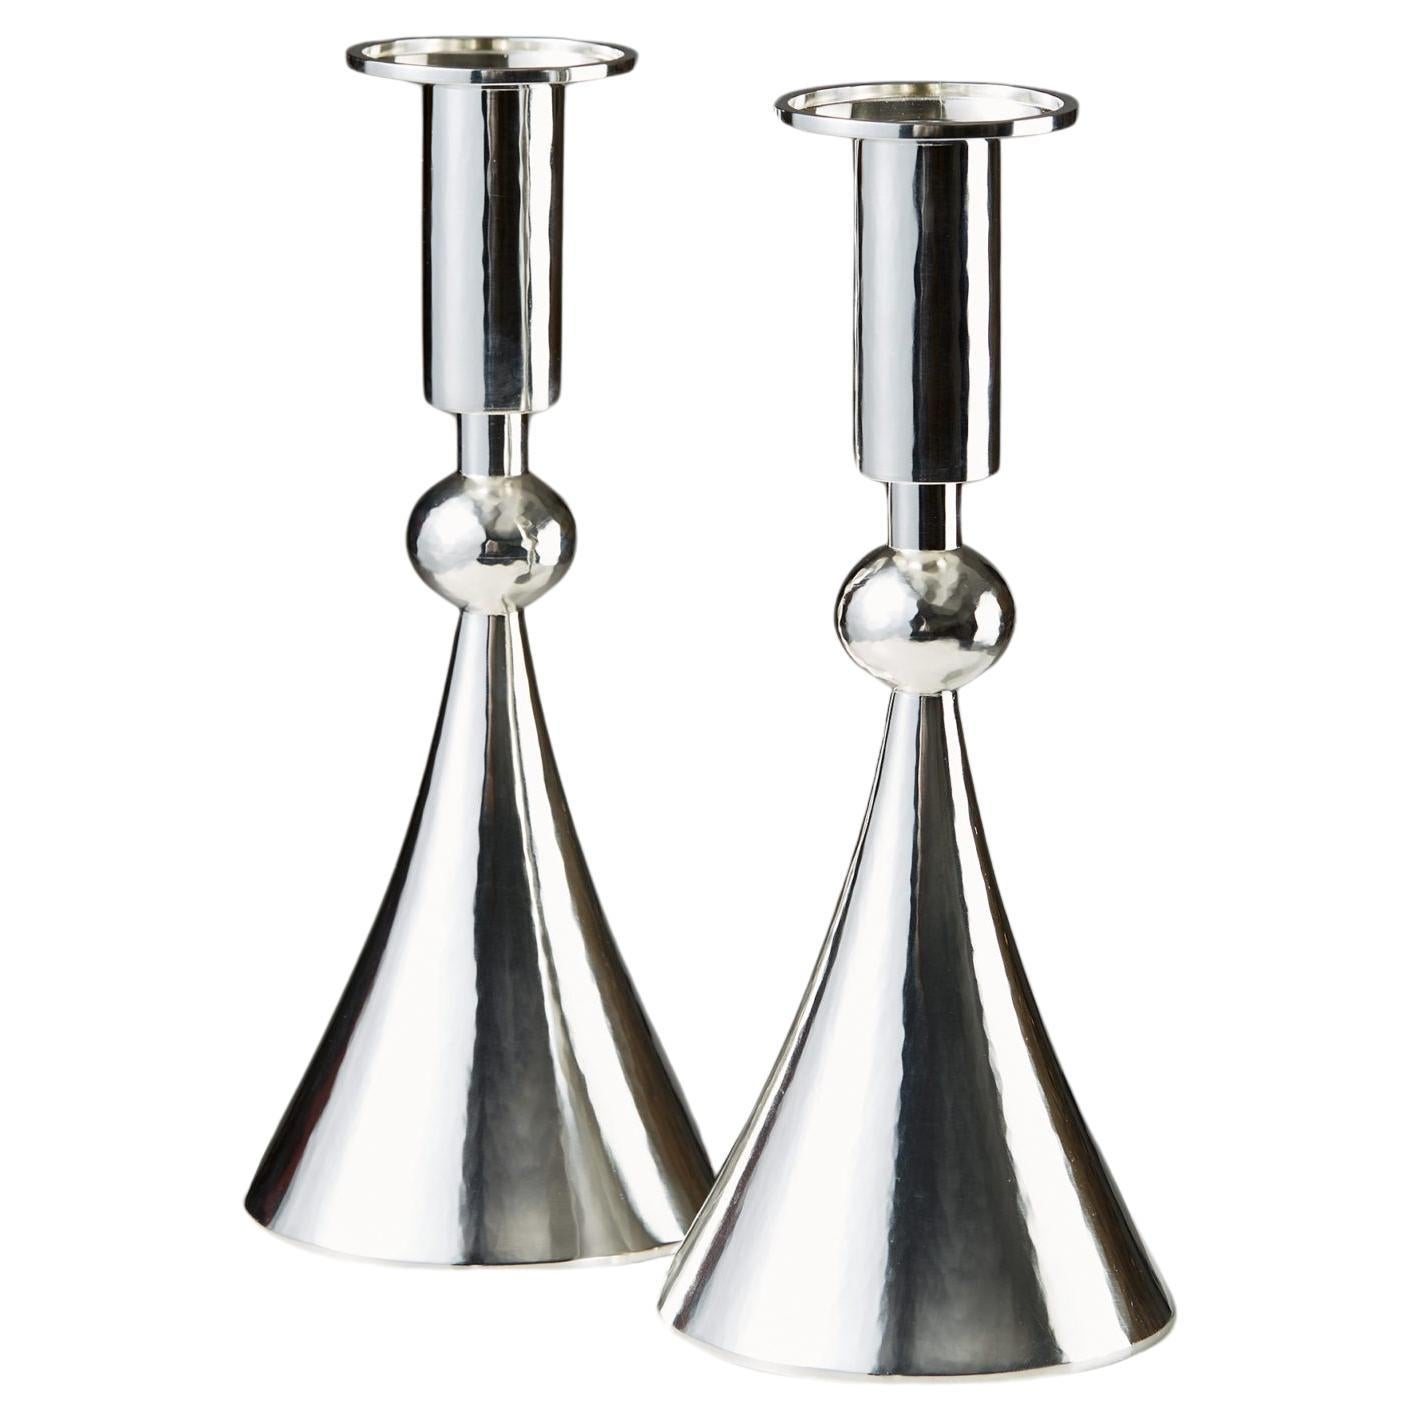 Pair of Candlesticks Designed by Sigurd Persson, Sterling Silver, Sweden, 1964 For Sale